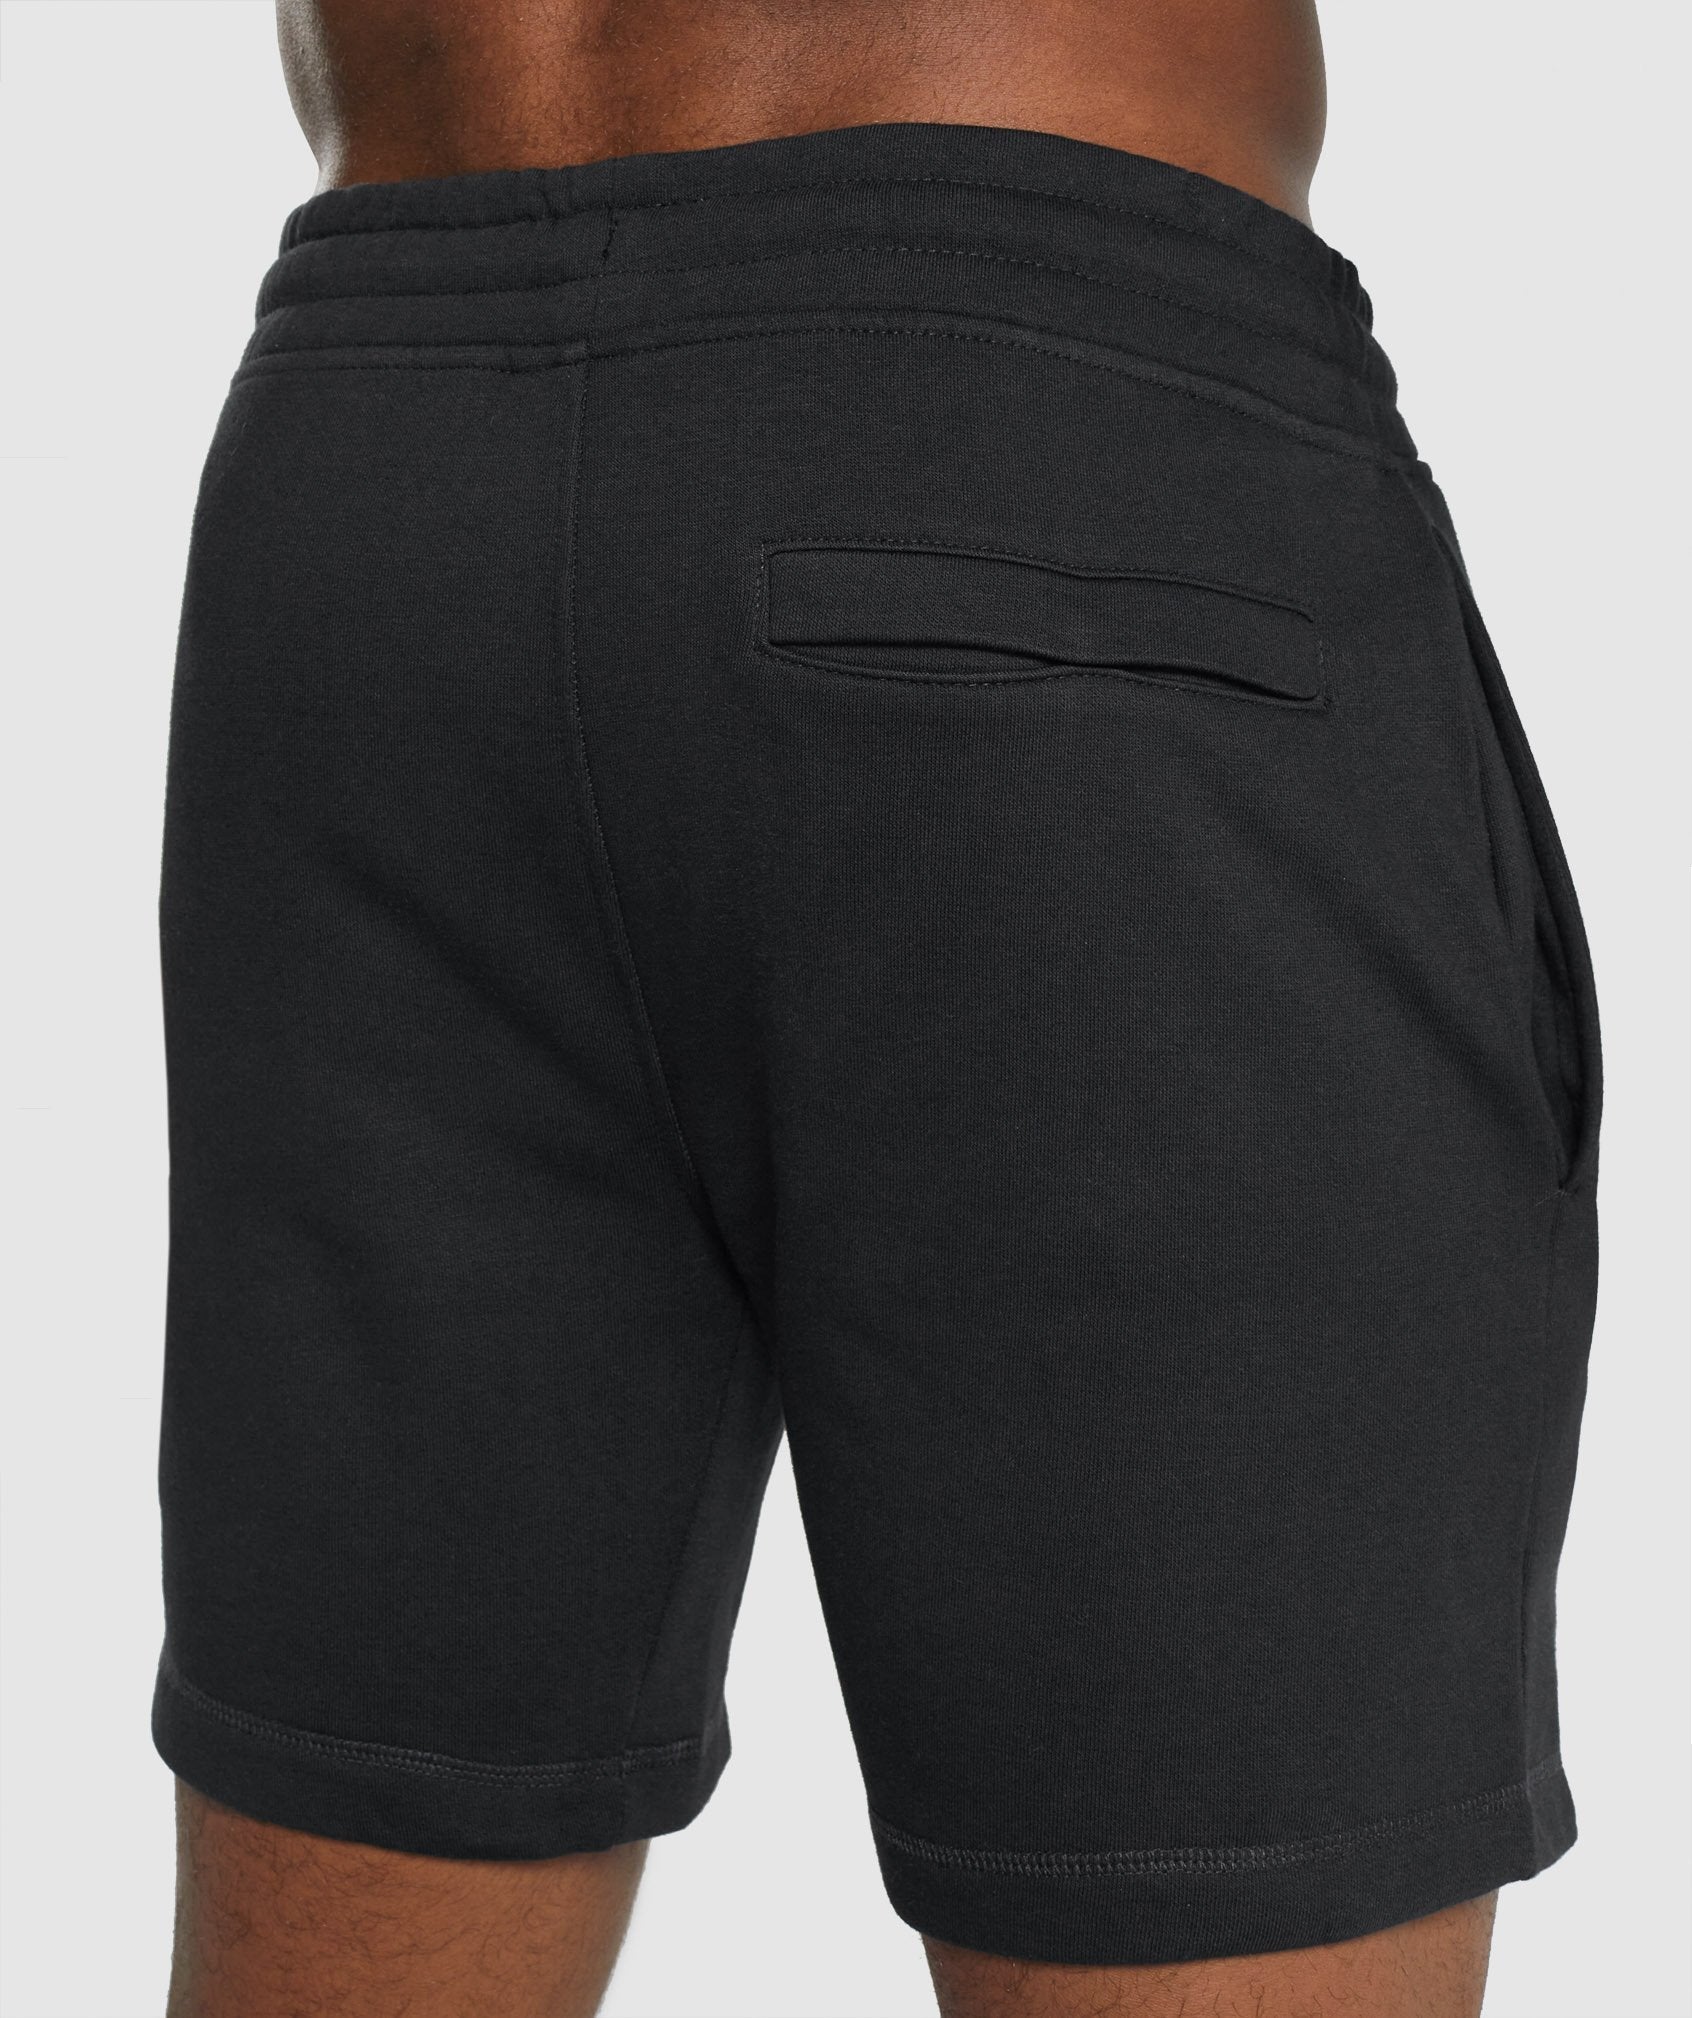 Crest Shorts in Black - view 5